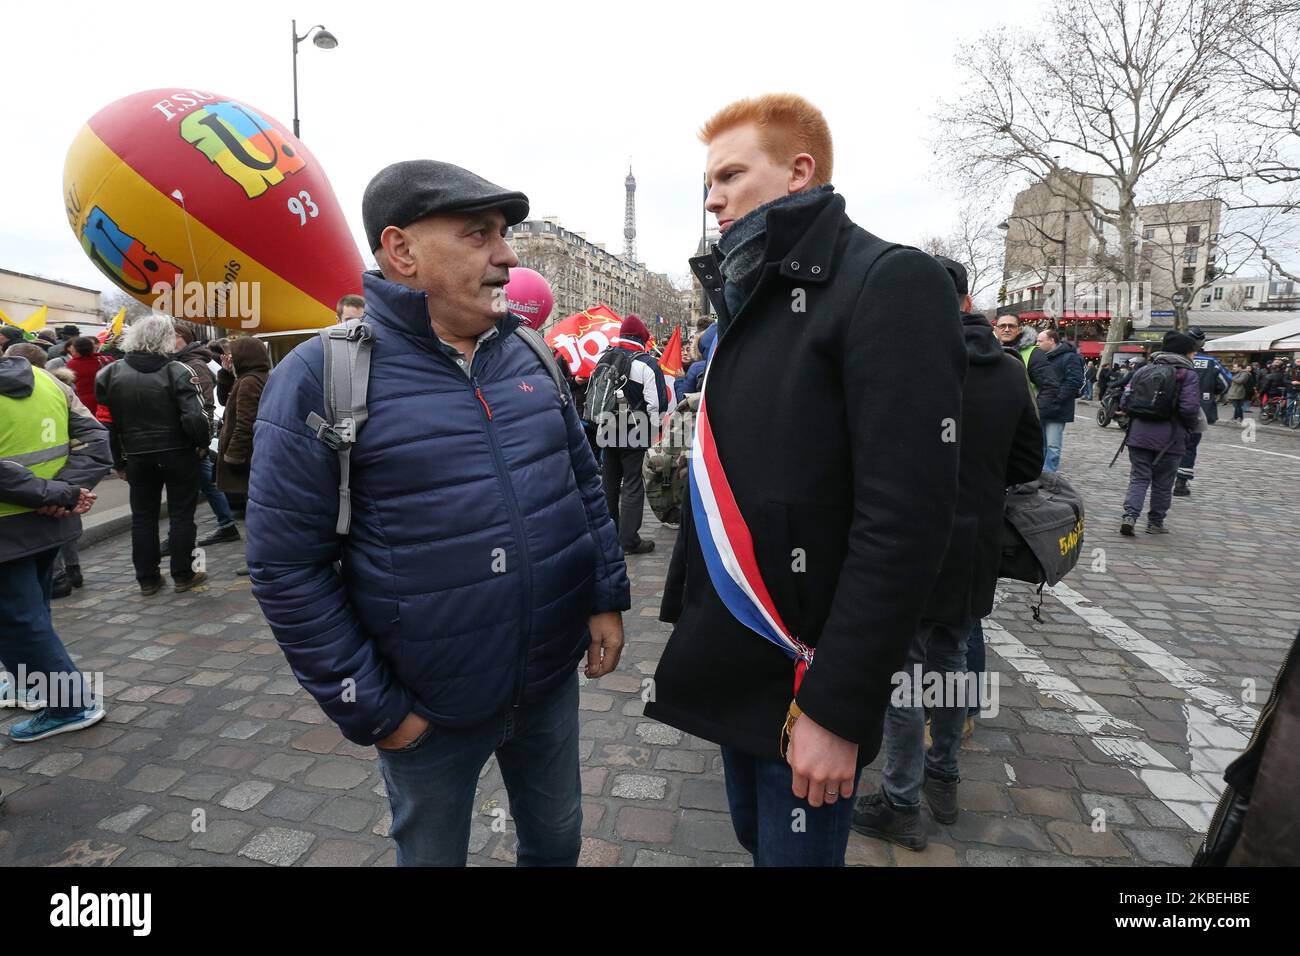 French leftist party La France Insoumise (LFI) MP Adrien Quatennens (R) takes part in a demonstration in front the Tour Eiffel in Paris on January 14, 2020, as part of a nationwide multi-sector strike against the French government's pensions overhaul. A transport strike dragged on into its 41st day on January 14, with both the French government and hardline unions digging in on the pension reforms that sparked the standoff. (Photo by Michel Stoupak/NurPhoto) Stock Photo